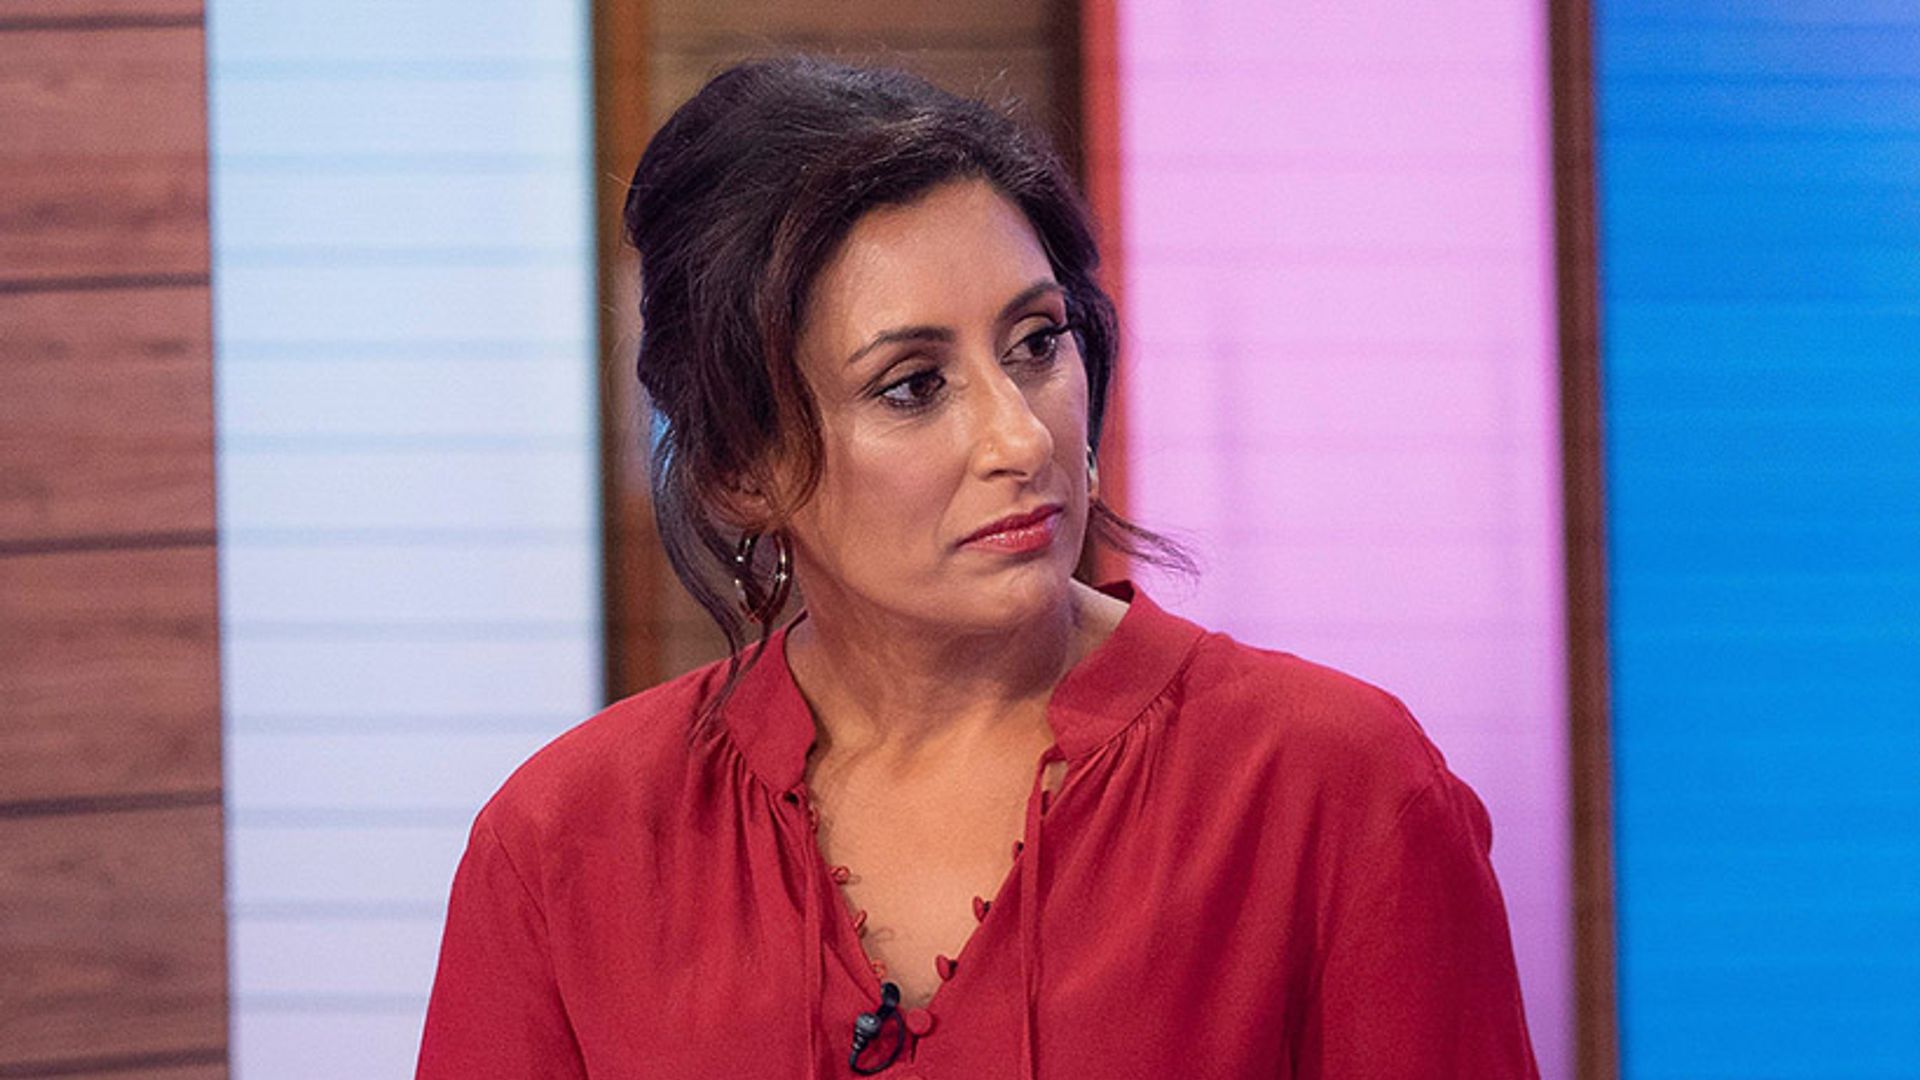 Saira Khan on Loose Women. She is wearing a red blouse. 